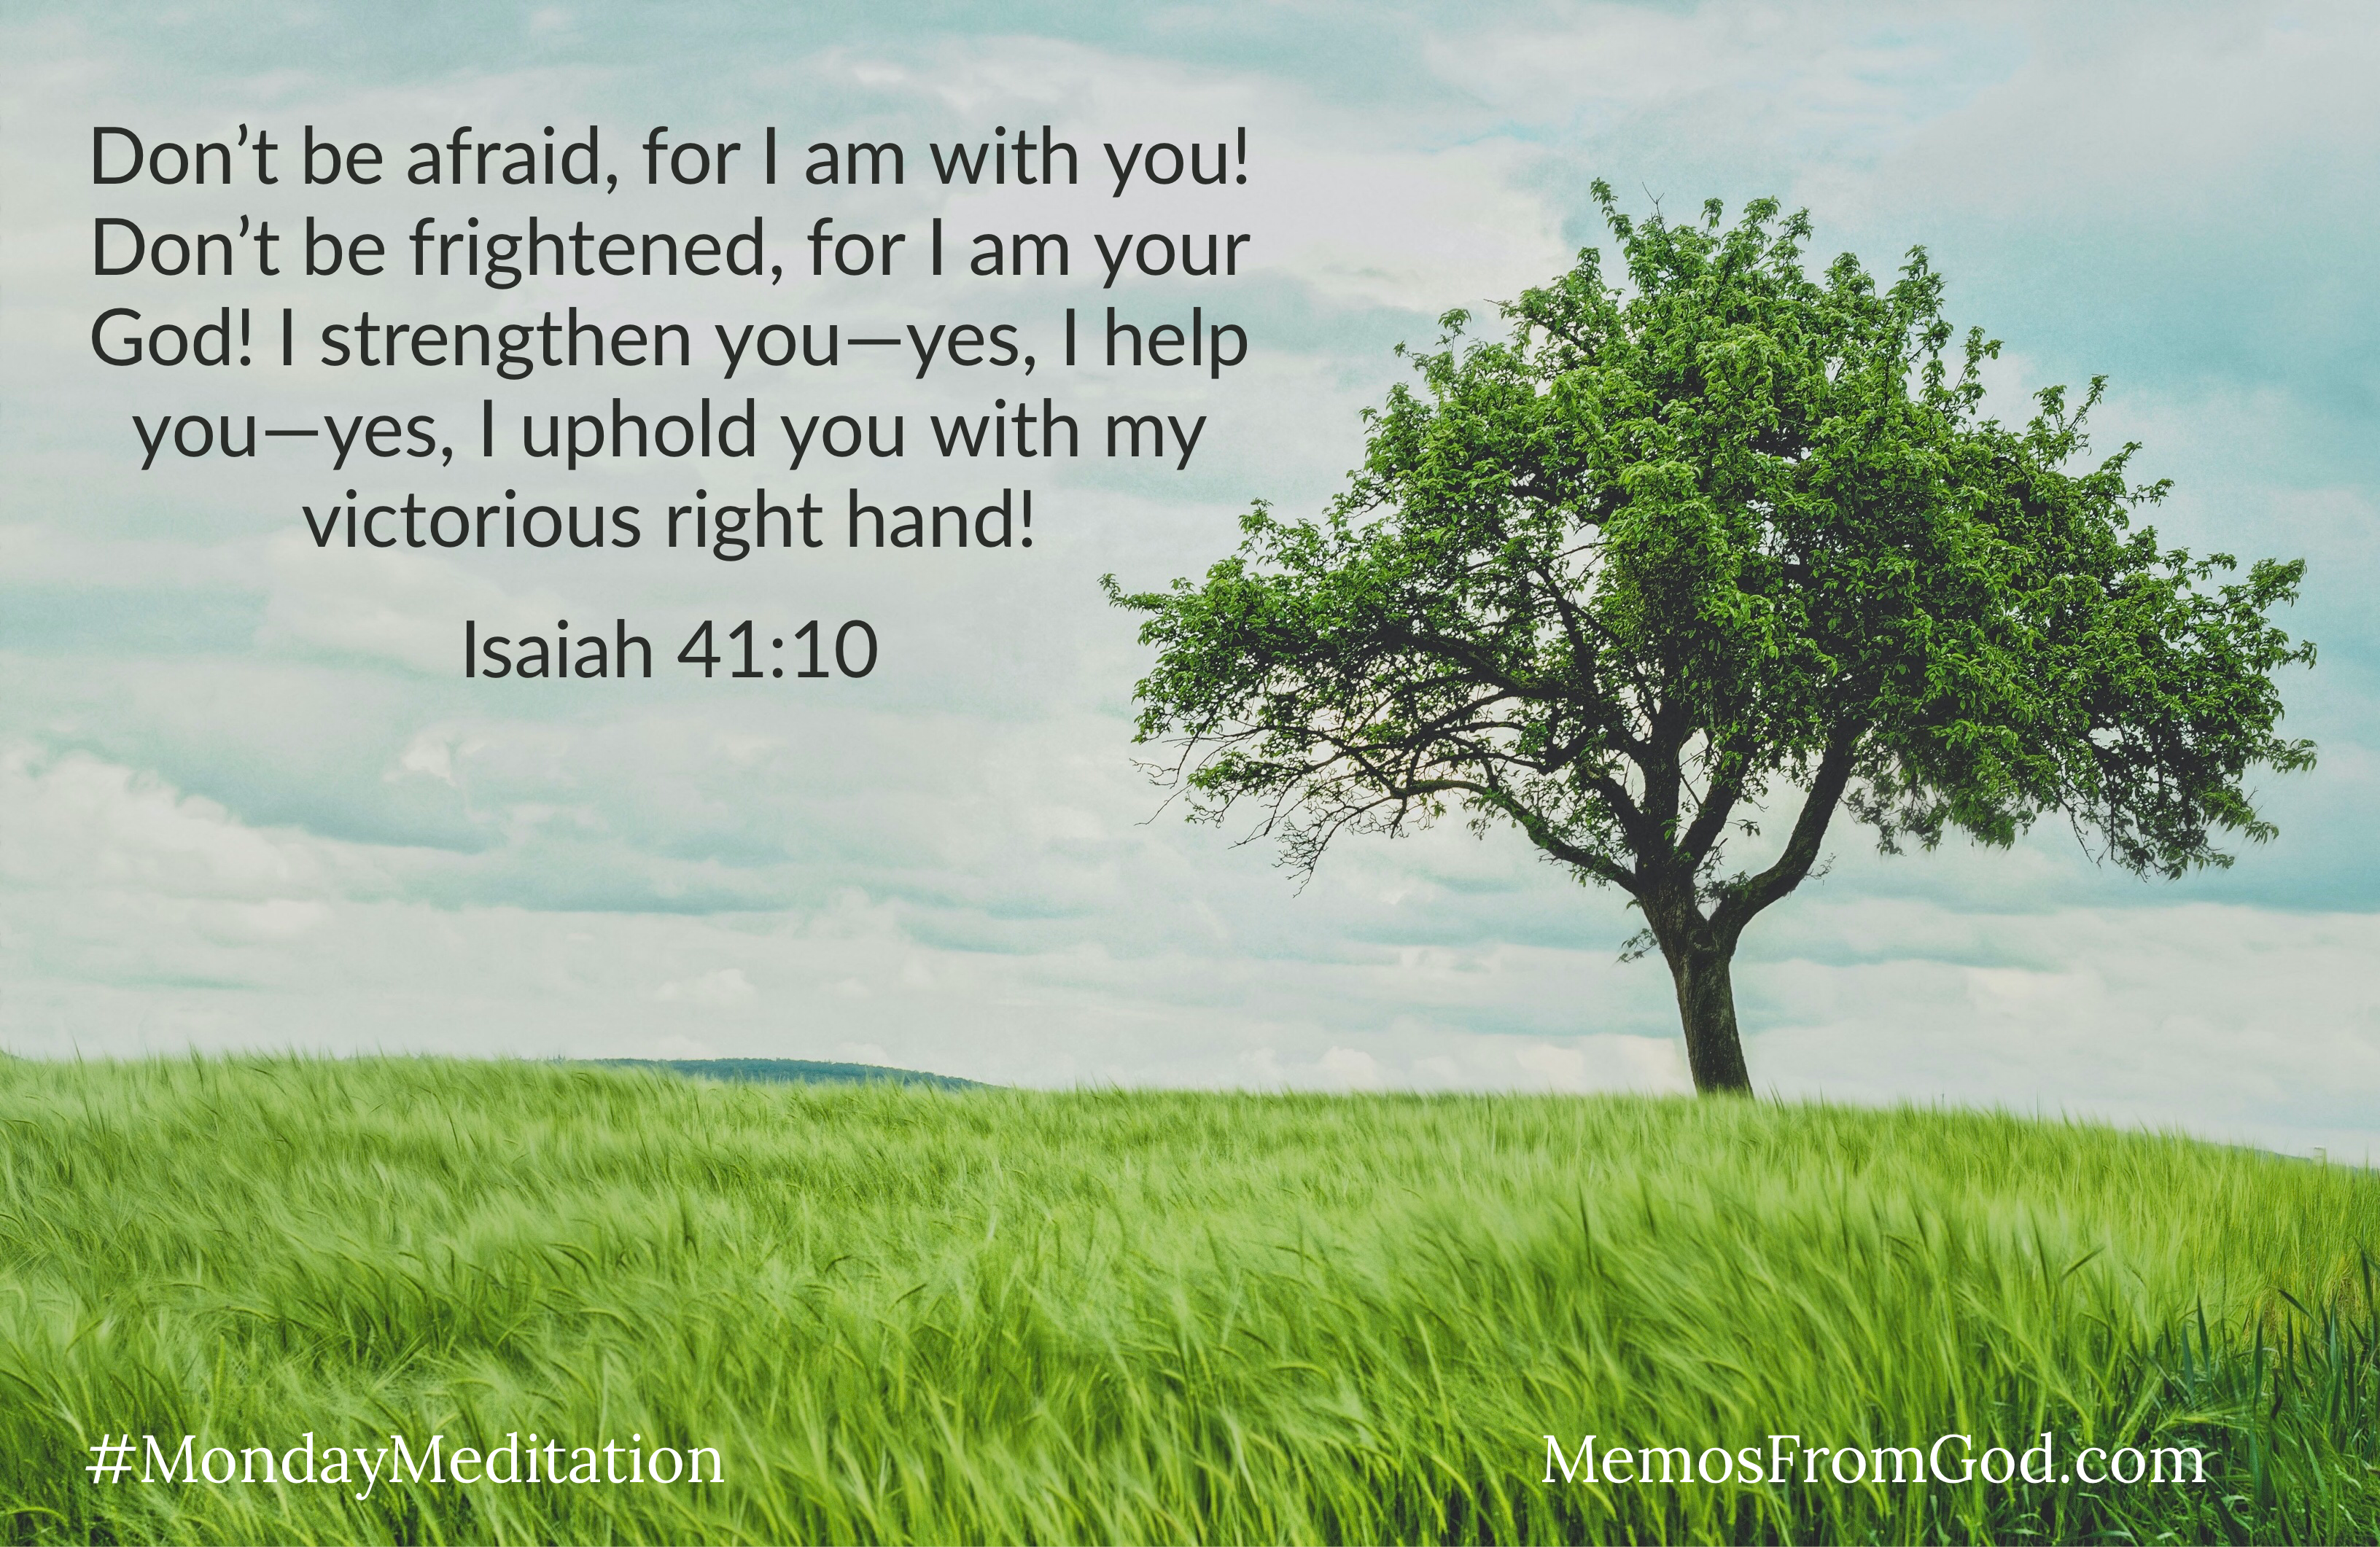 A single tree with green leaves, in a green, grassy field under a cloudy sky. Caption: Don't be afraid, for I am with you! Don't be frightened, for I am your God! I strengthen you--yes, I help you--yes, I uphold you with my victorious right hand! Isaiah 41:10